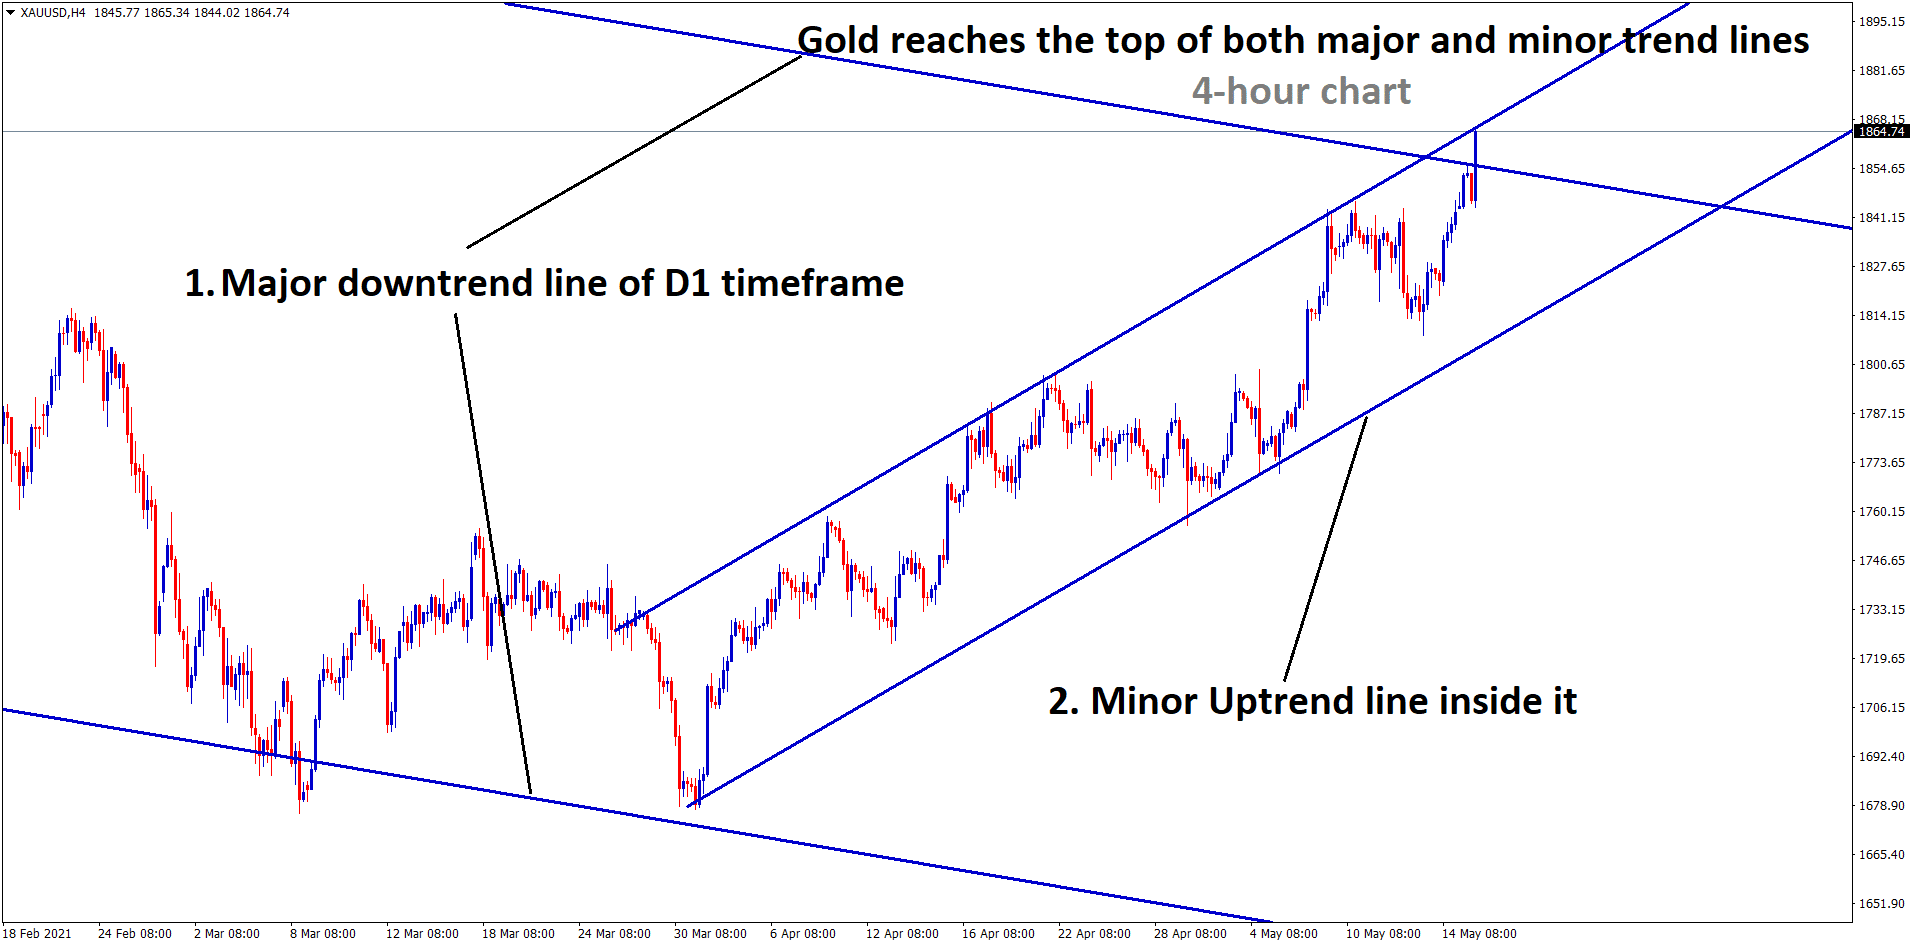 Gold reaches the top of both major and minor trend lines